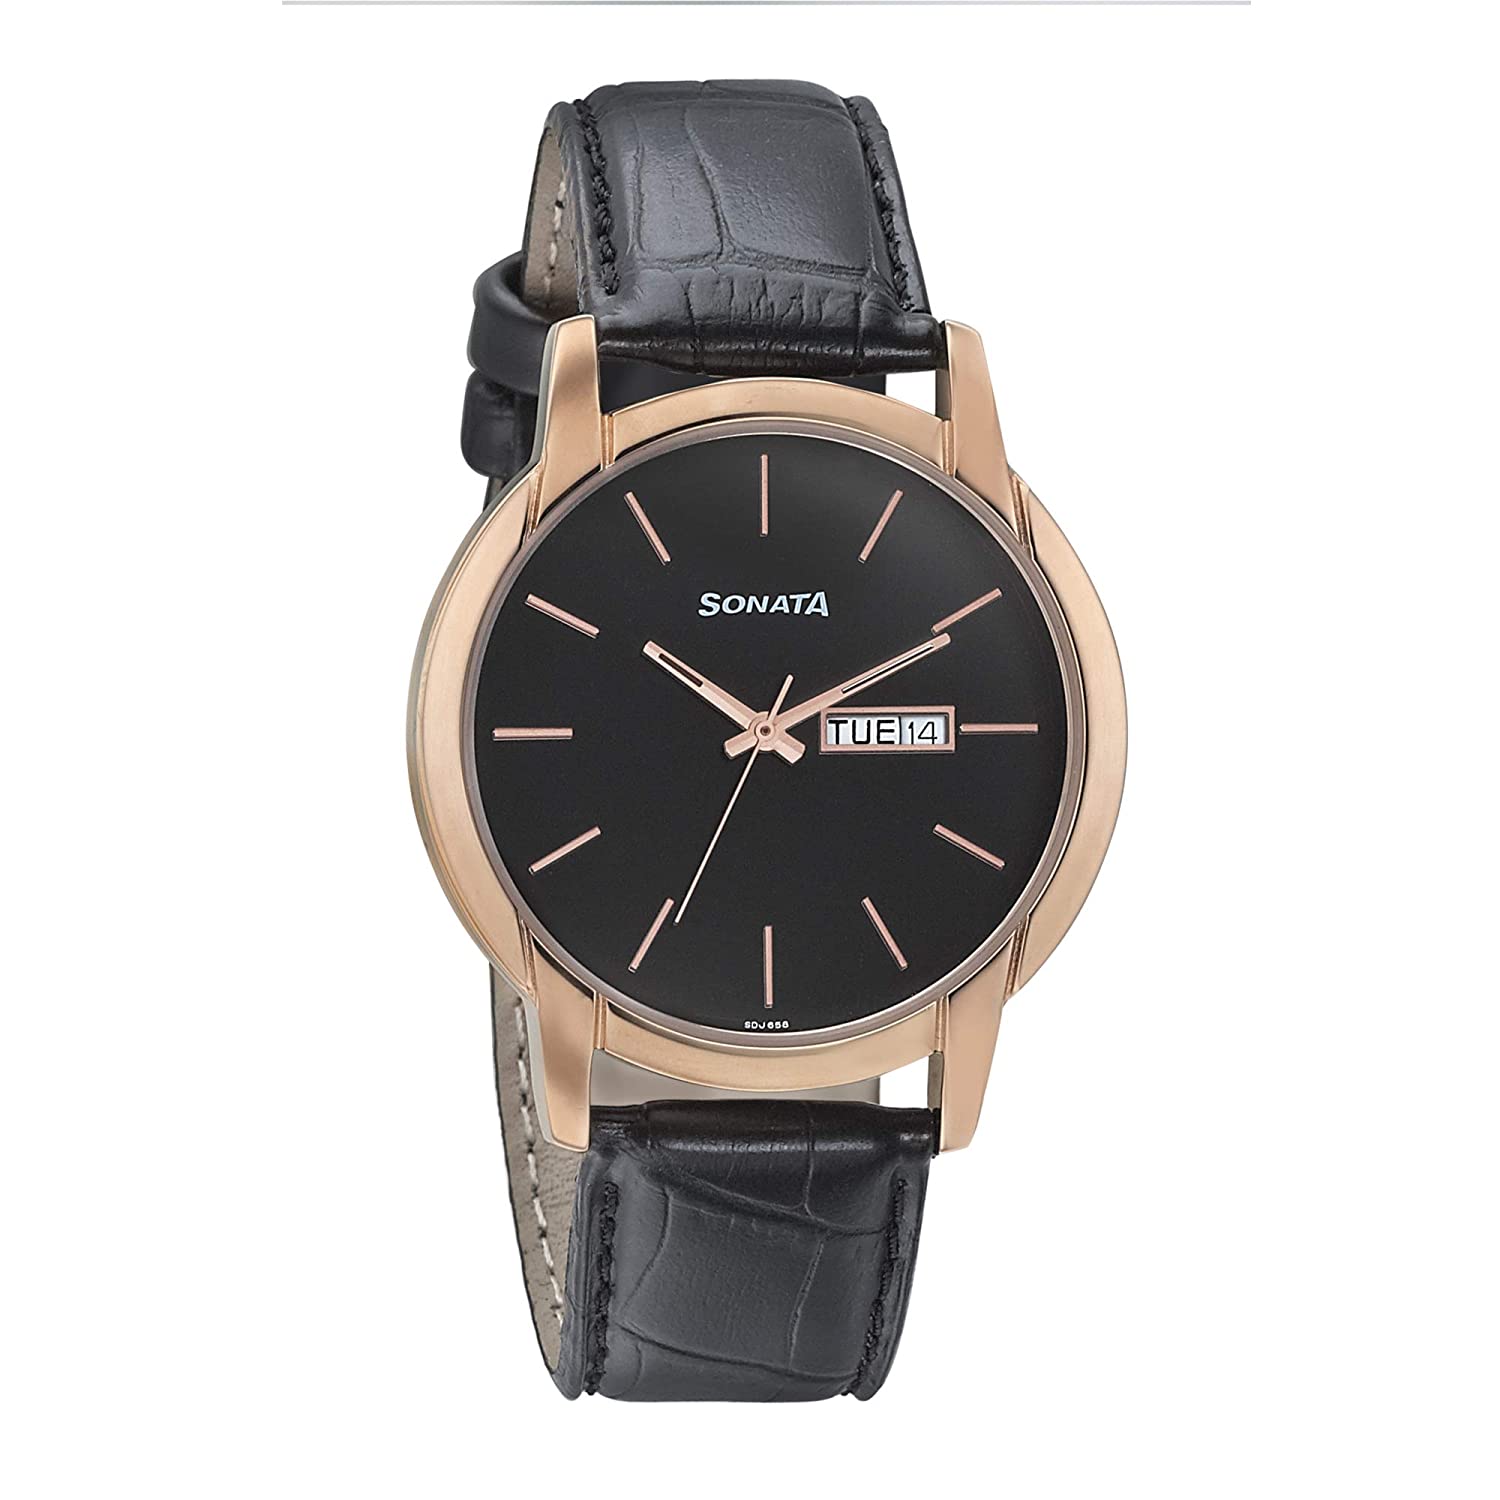 Sonata Gold Analog Men's Watch 77031WL05 | Leather Band | Water-Resistant | Quartz Movement | Classic Style | Fashionable | Durable | Affordable | Halabh.com